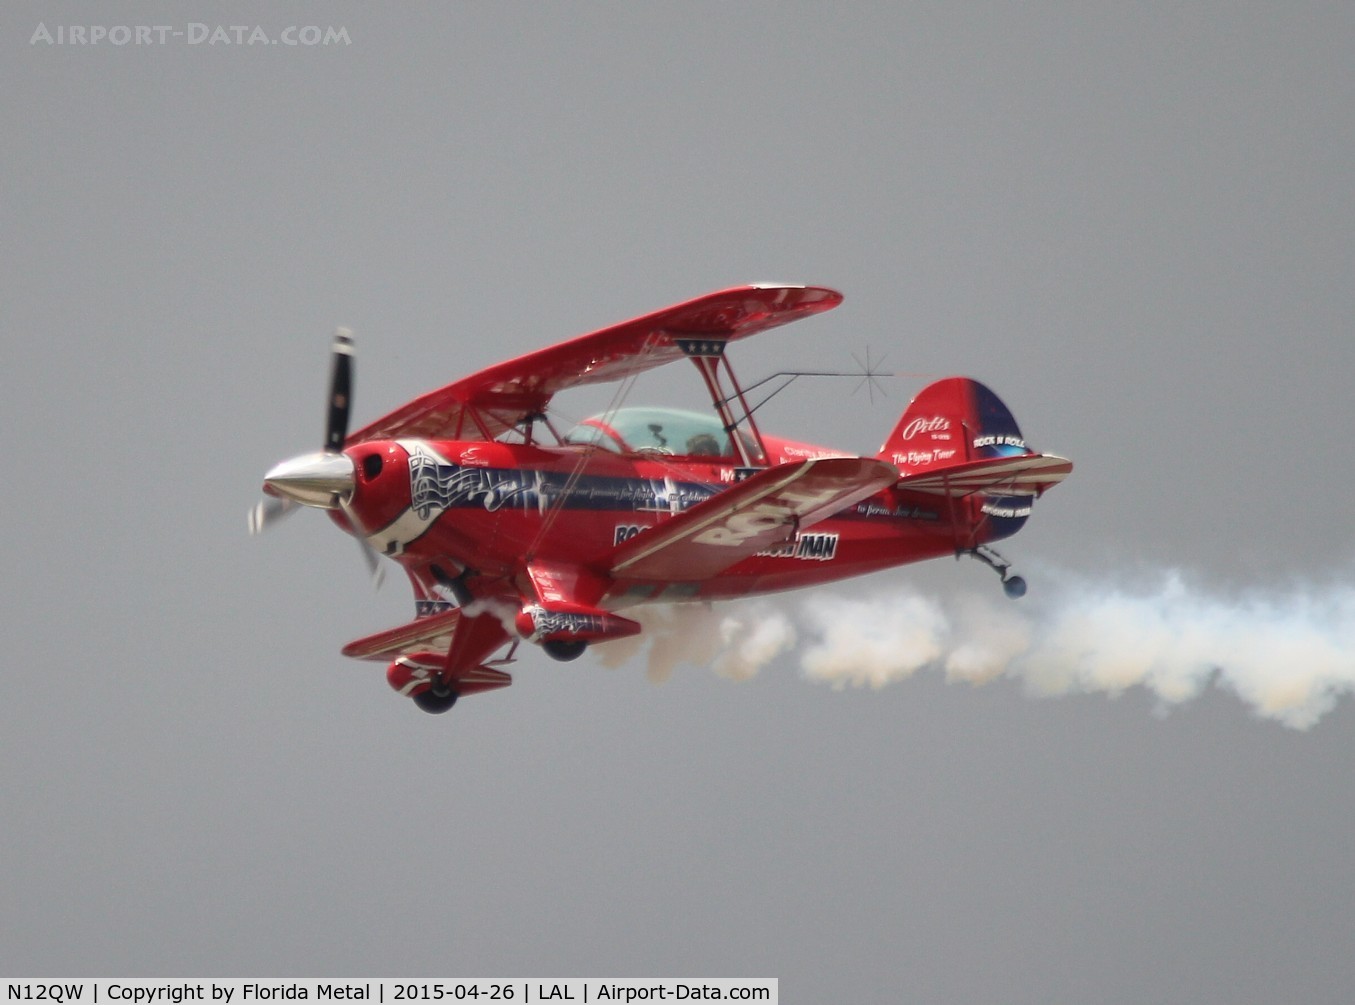 N12QW, 1984 Pitts S-2B Special C/N 5053, Pitts S-2B